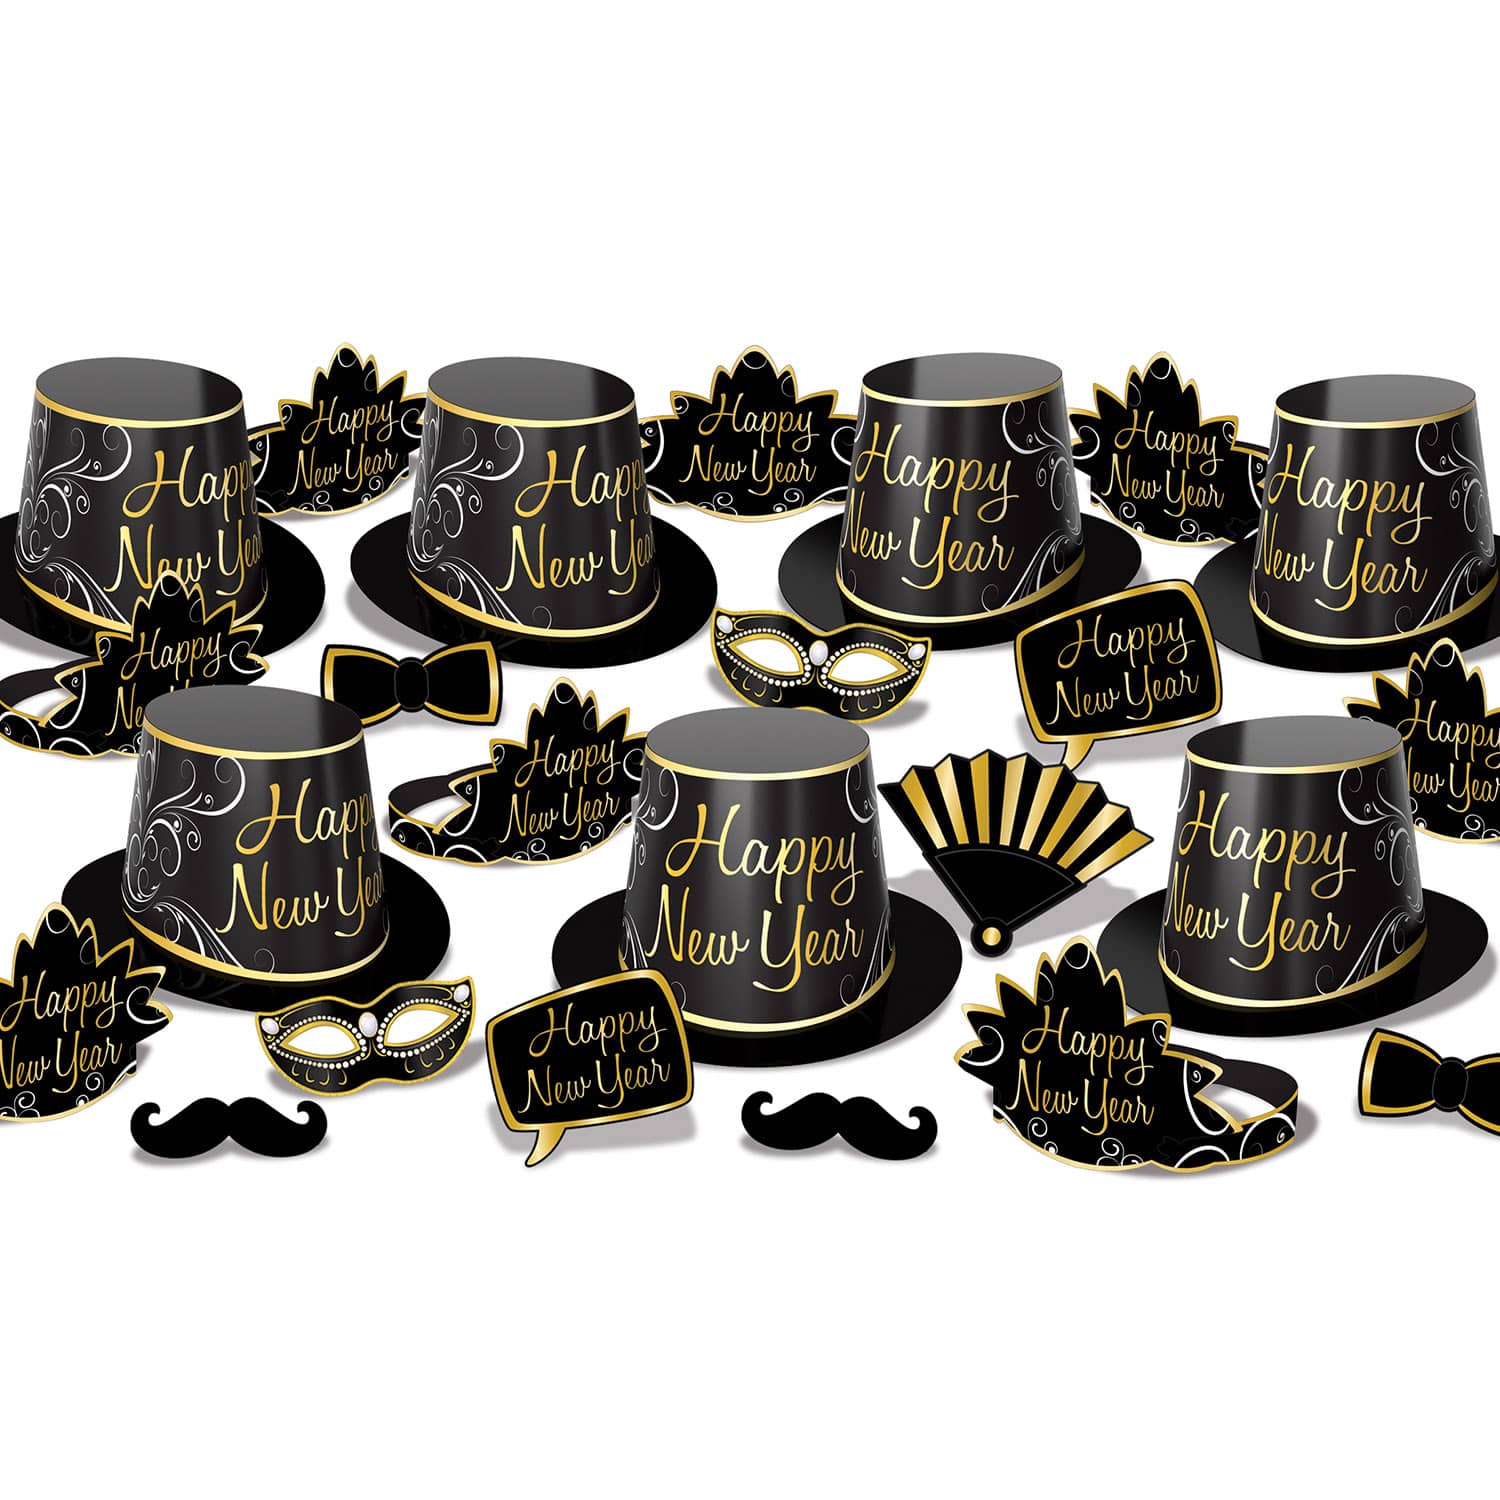 Simply Paper New Year Assortment for 50 - Black/Gold Simply Paper New Year Assortment for 50, 2022, eco friendly, paper product, new years eve, party kit, hat, tiara, photo fun signs, wholesale, inexpensive, bulk, party favor